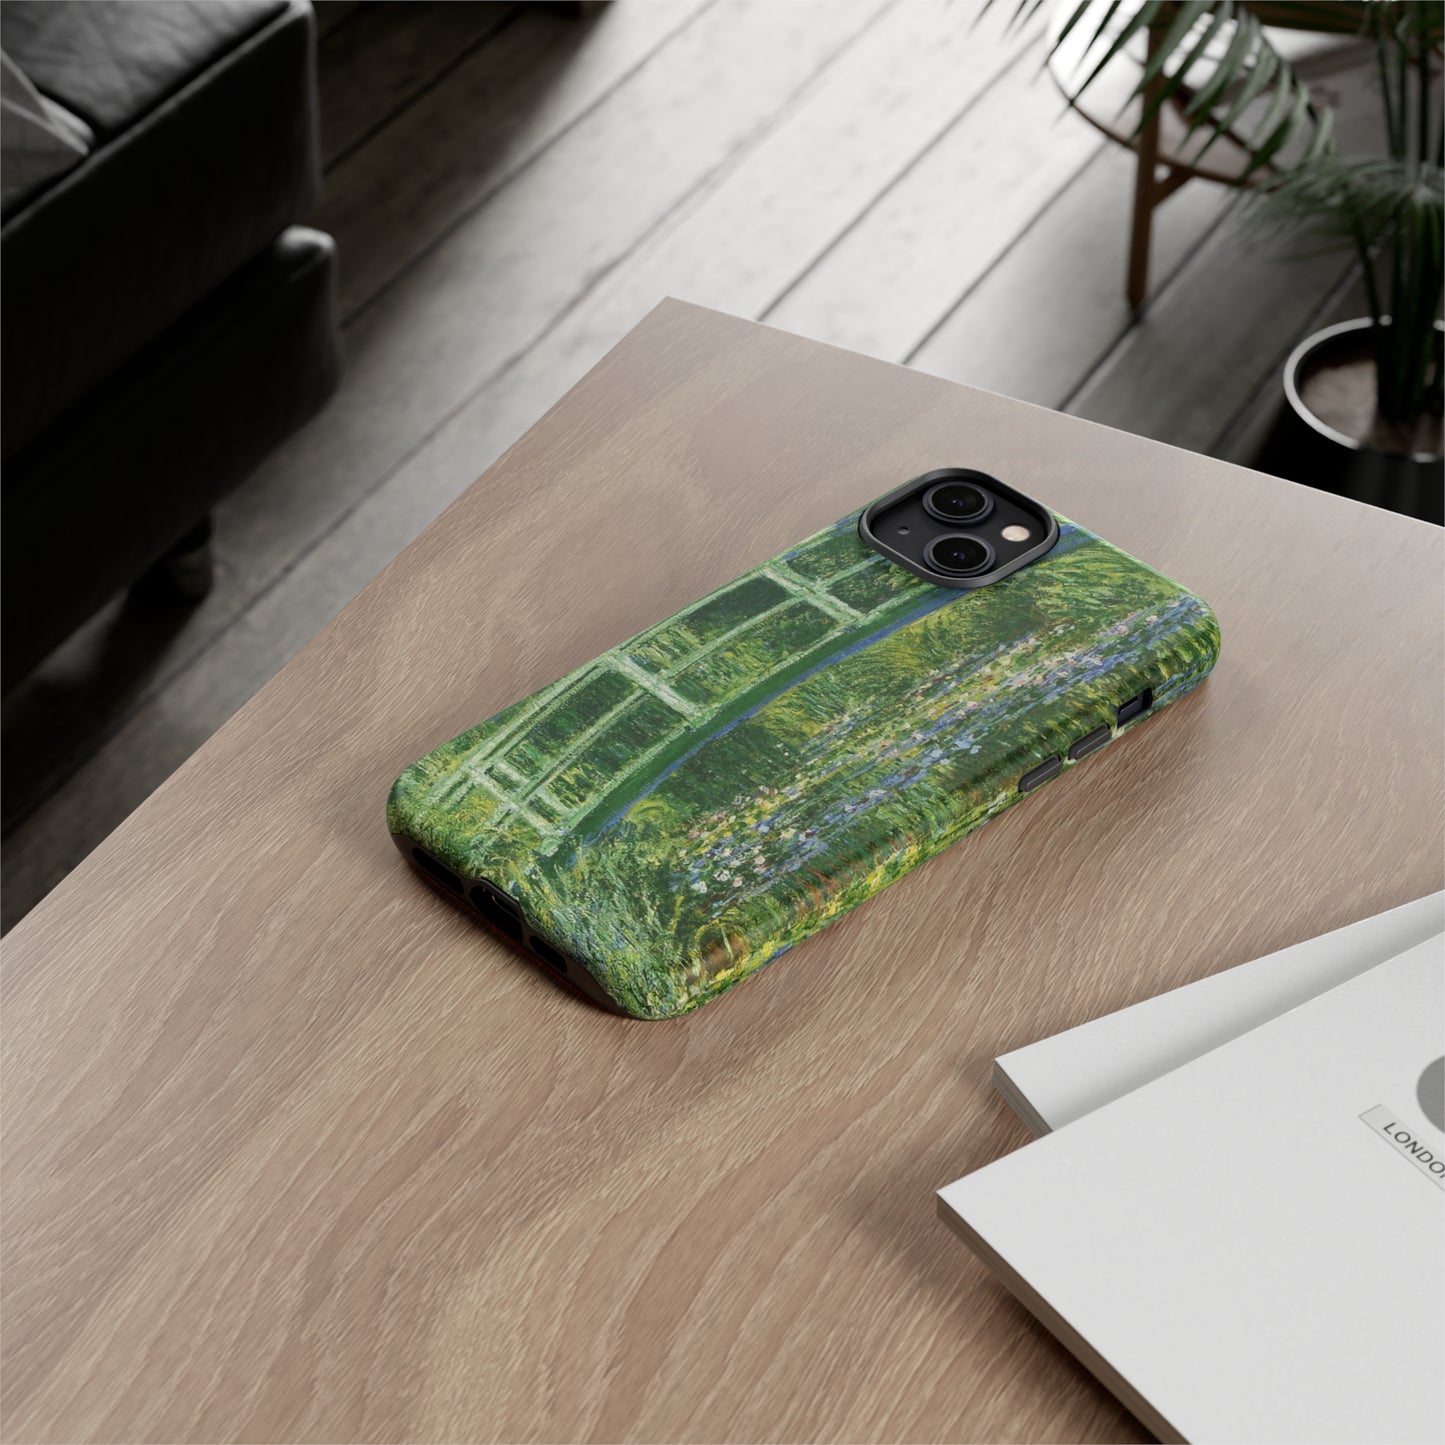 Water Lilies and a Japanese Bridge by Claude Monet - Cell Phone Case